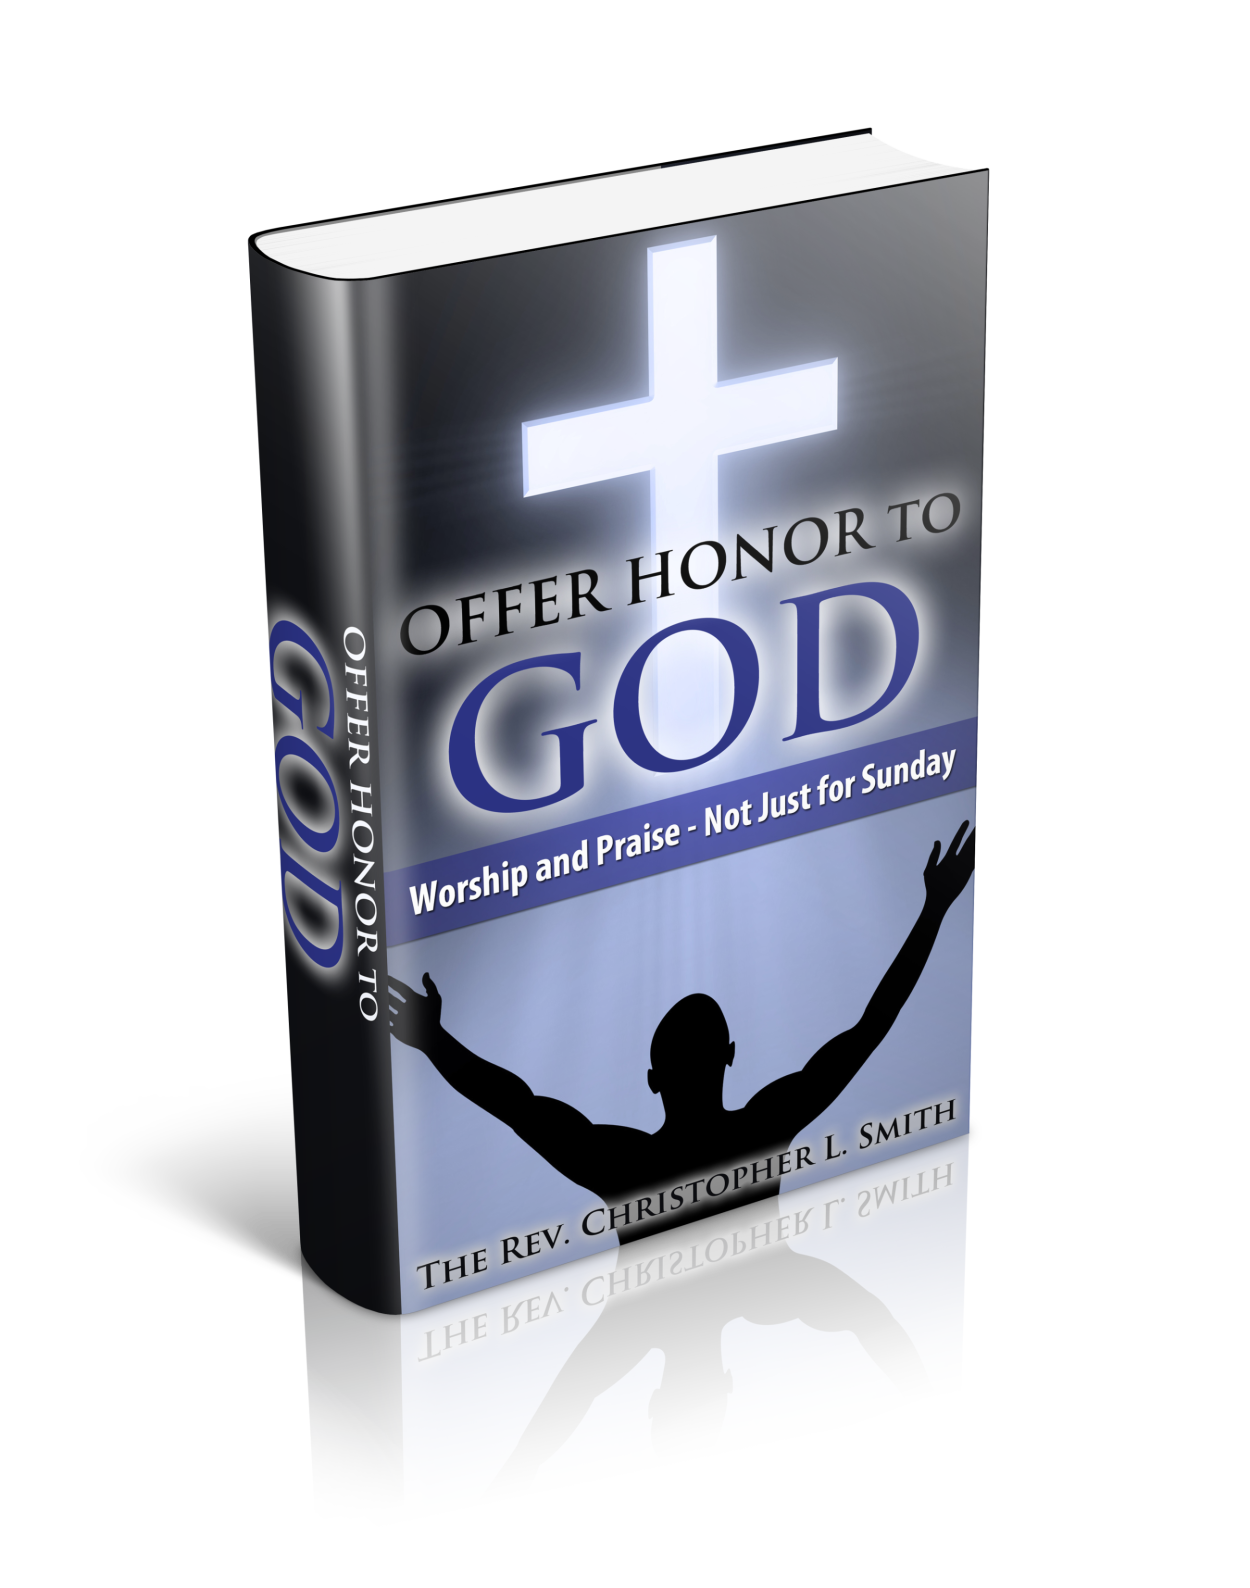 Offer Honor to God - book image